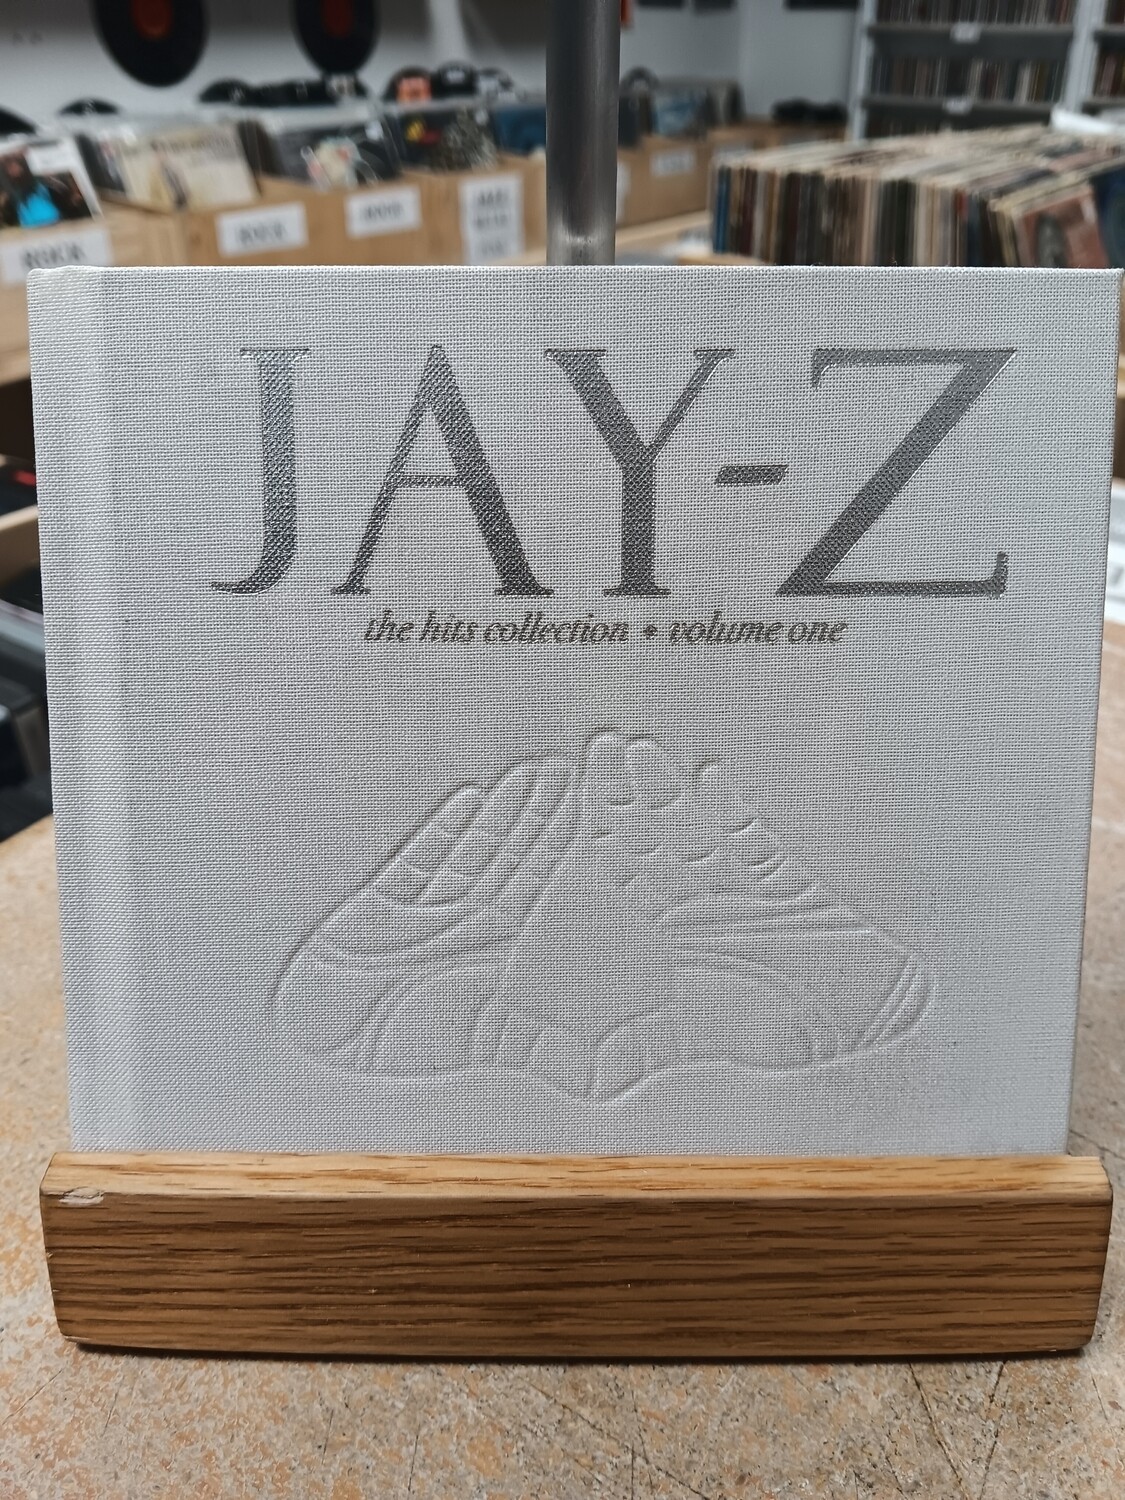 Jay-Z - The Hits Collection Volume 1 (CD)